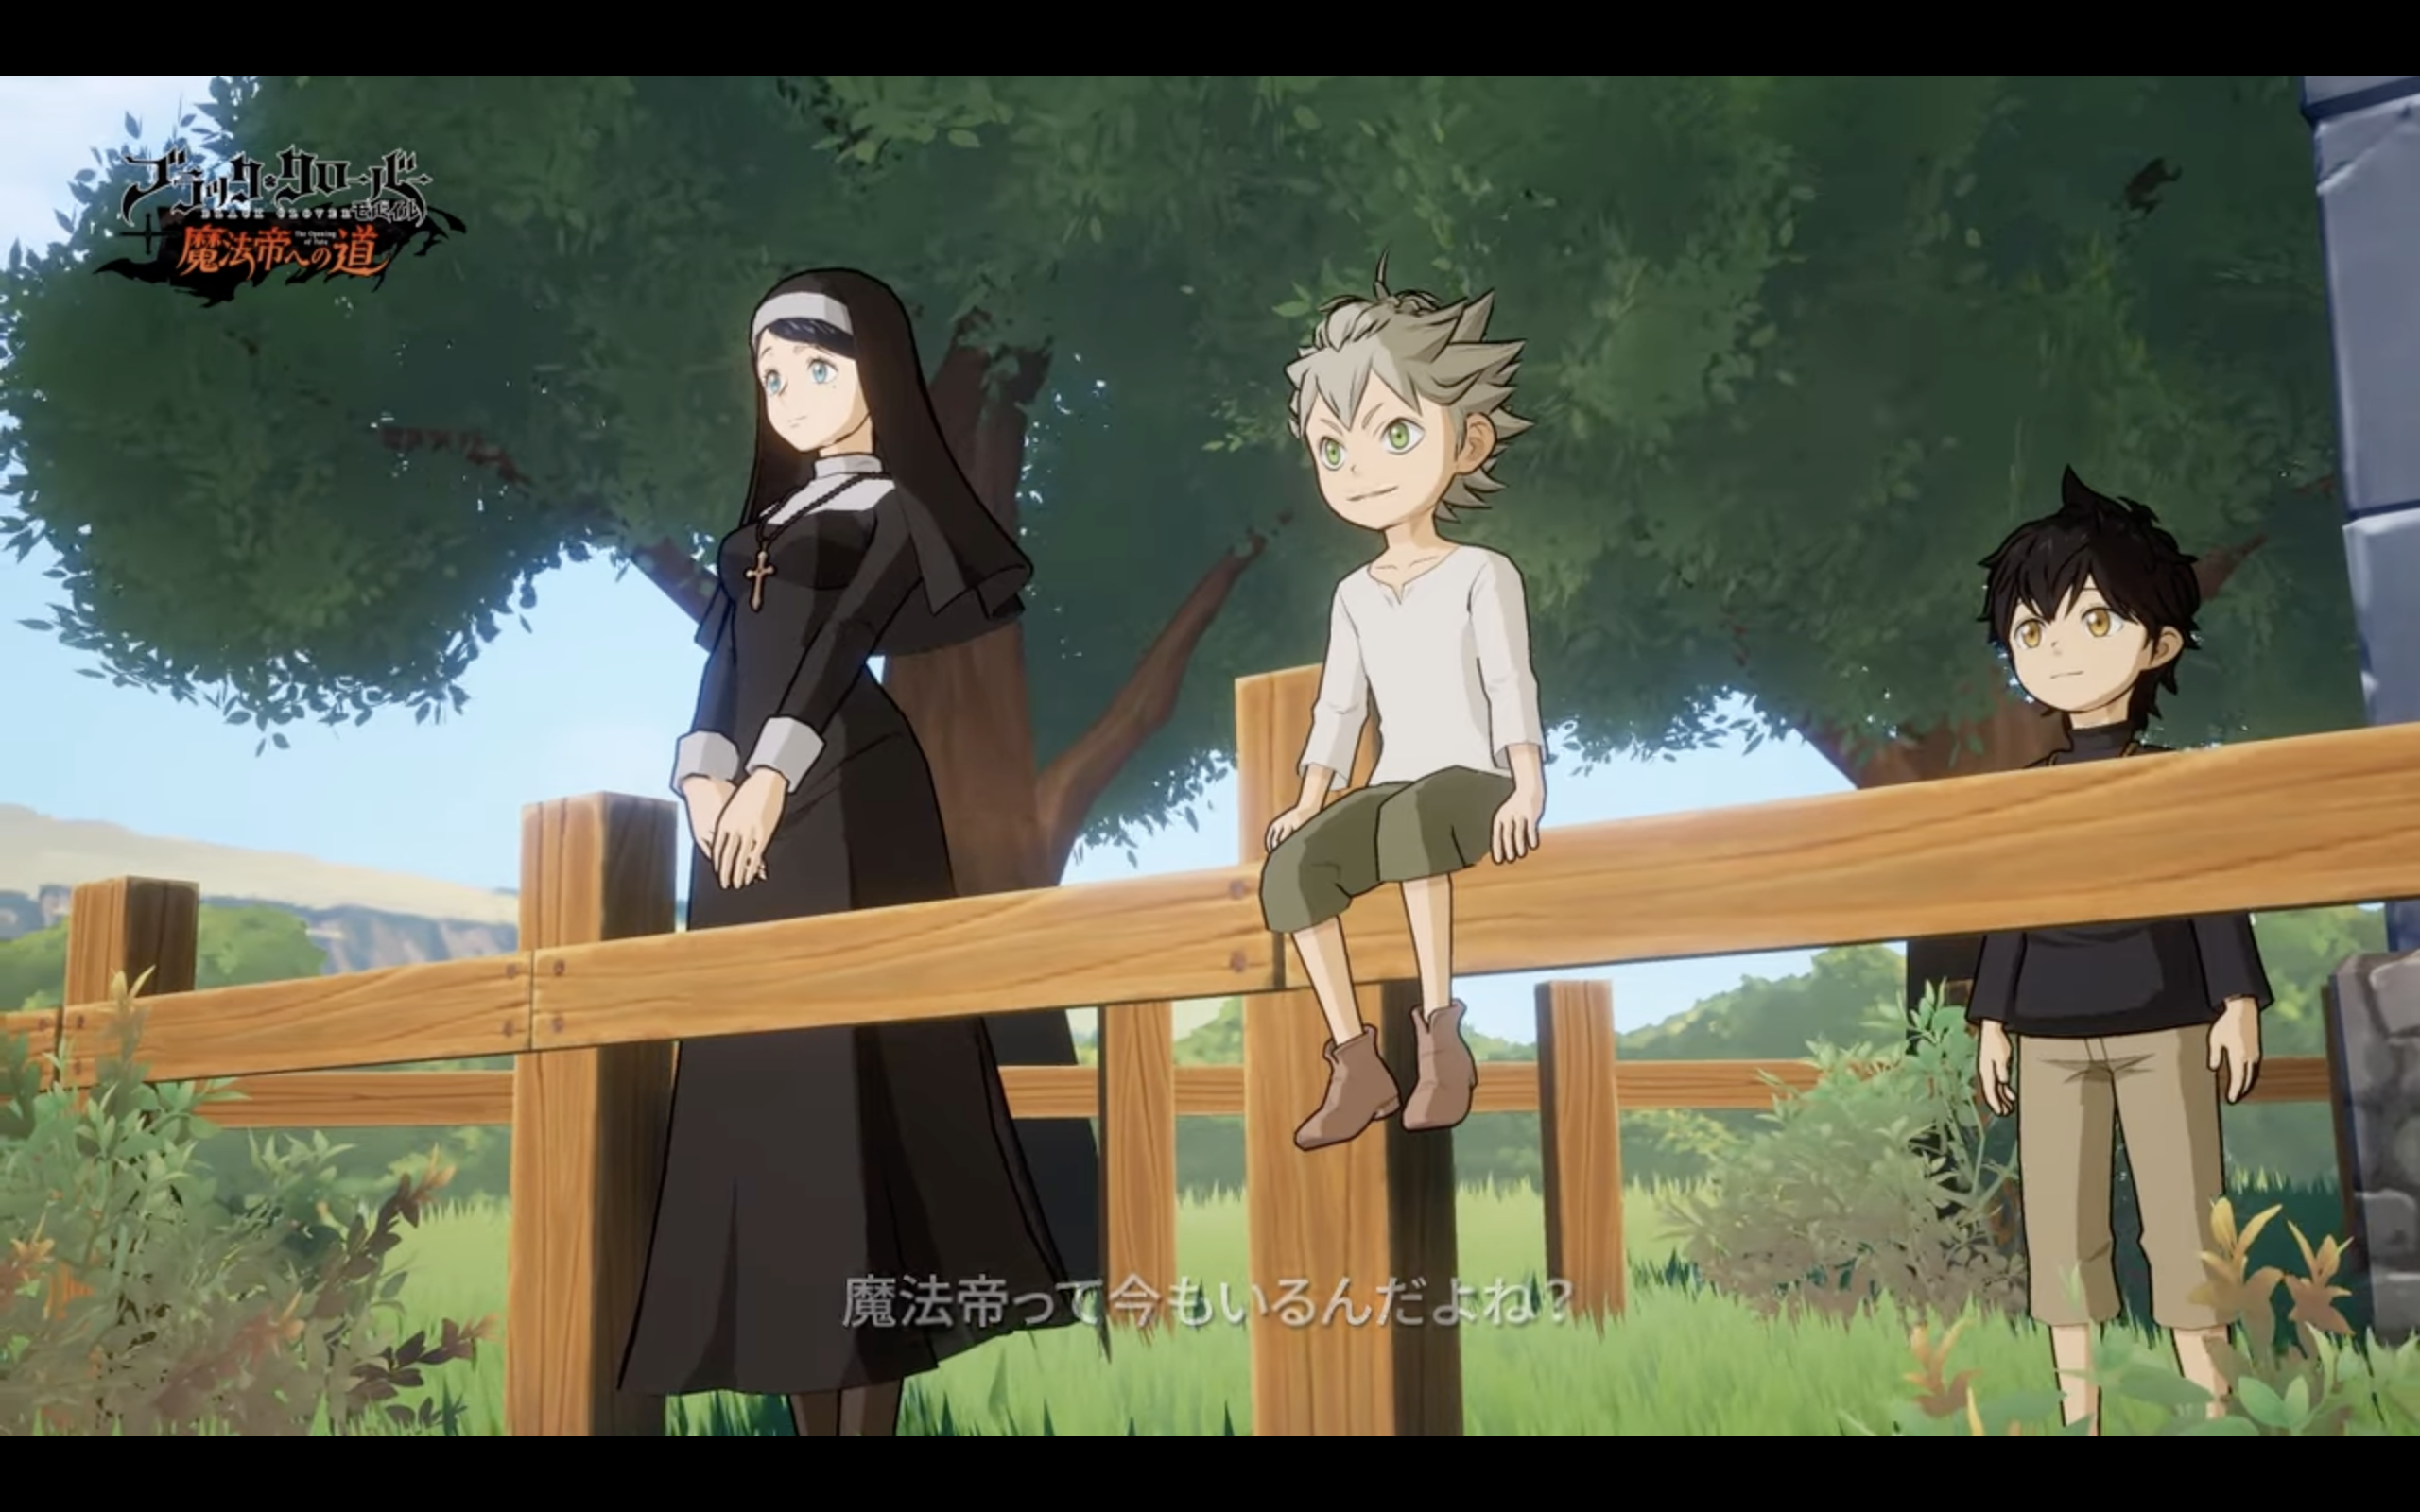 Black Clover Season 5: Potential Release Date, Leaks, What to